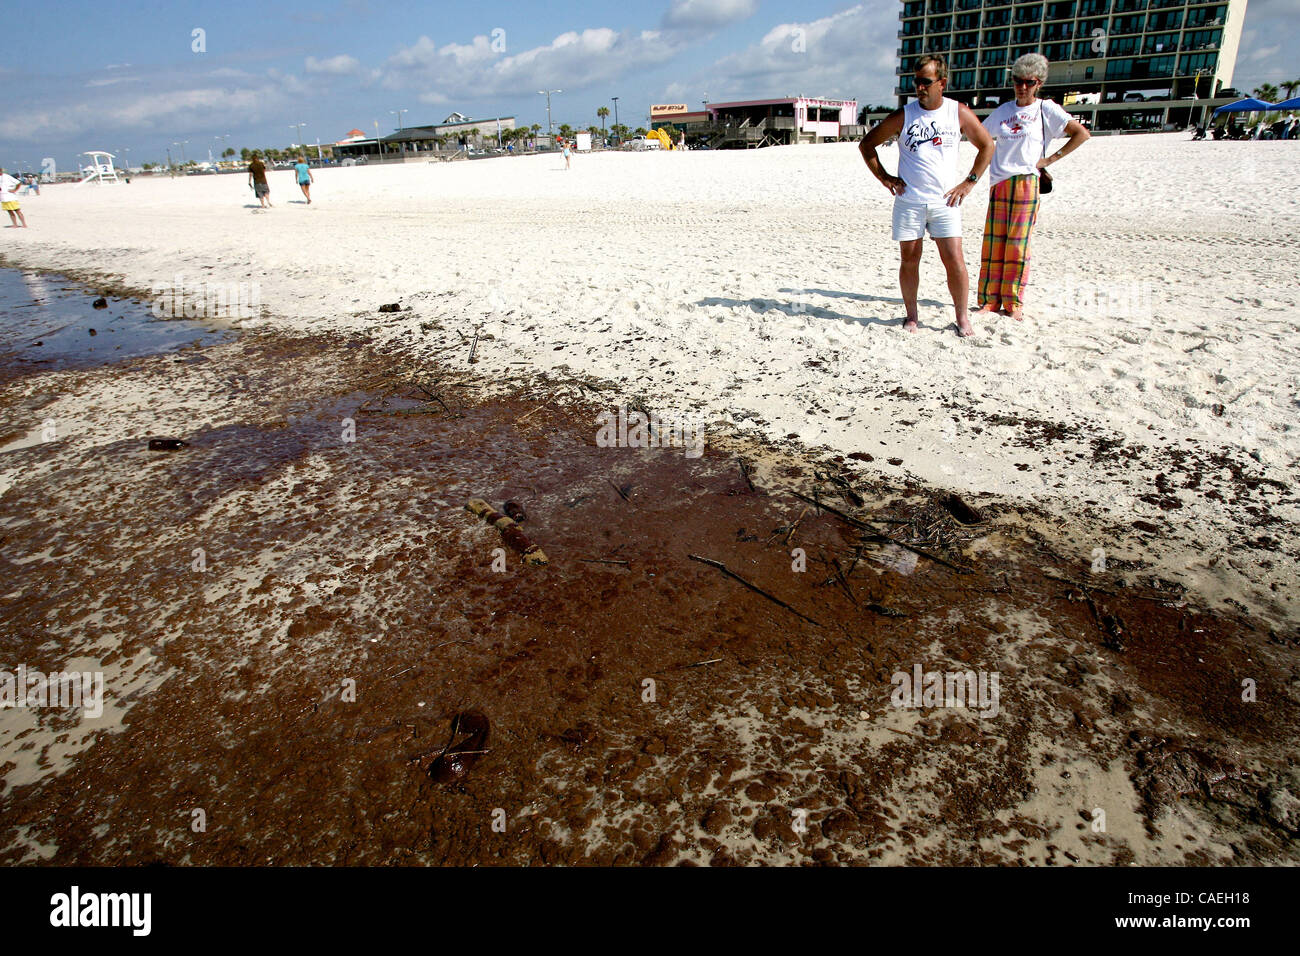 (left to right) Ricky and Lenita Braken look at a large soup of oil that washed up on the public beach in Gulf Shores, Alabama USA on June 12  2010.  A large band of oil washed up on the beach earlier in the morning. Stock Photo